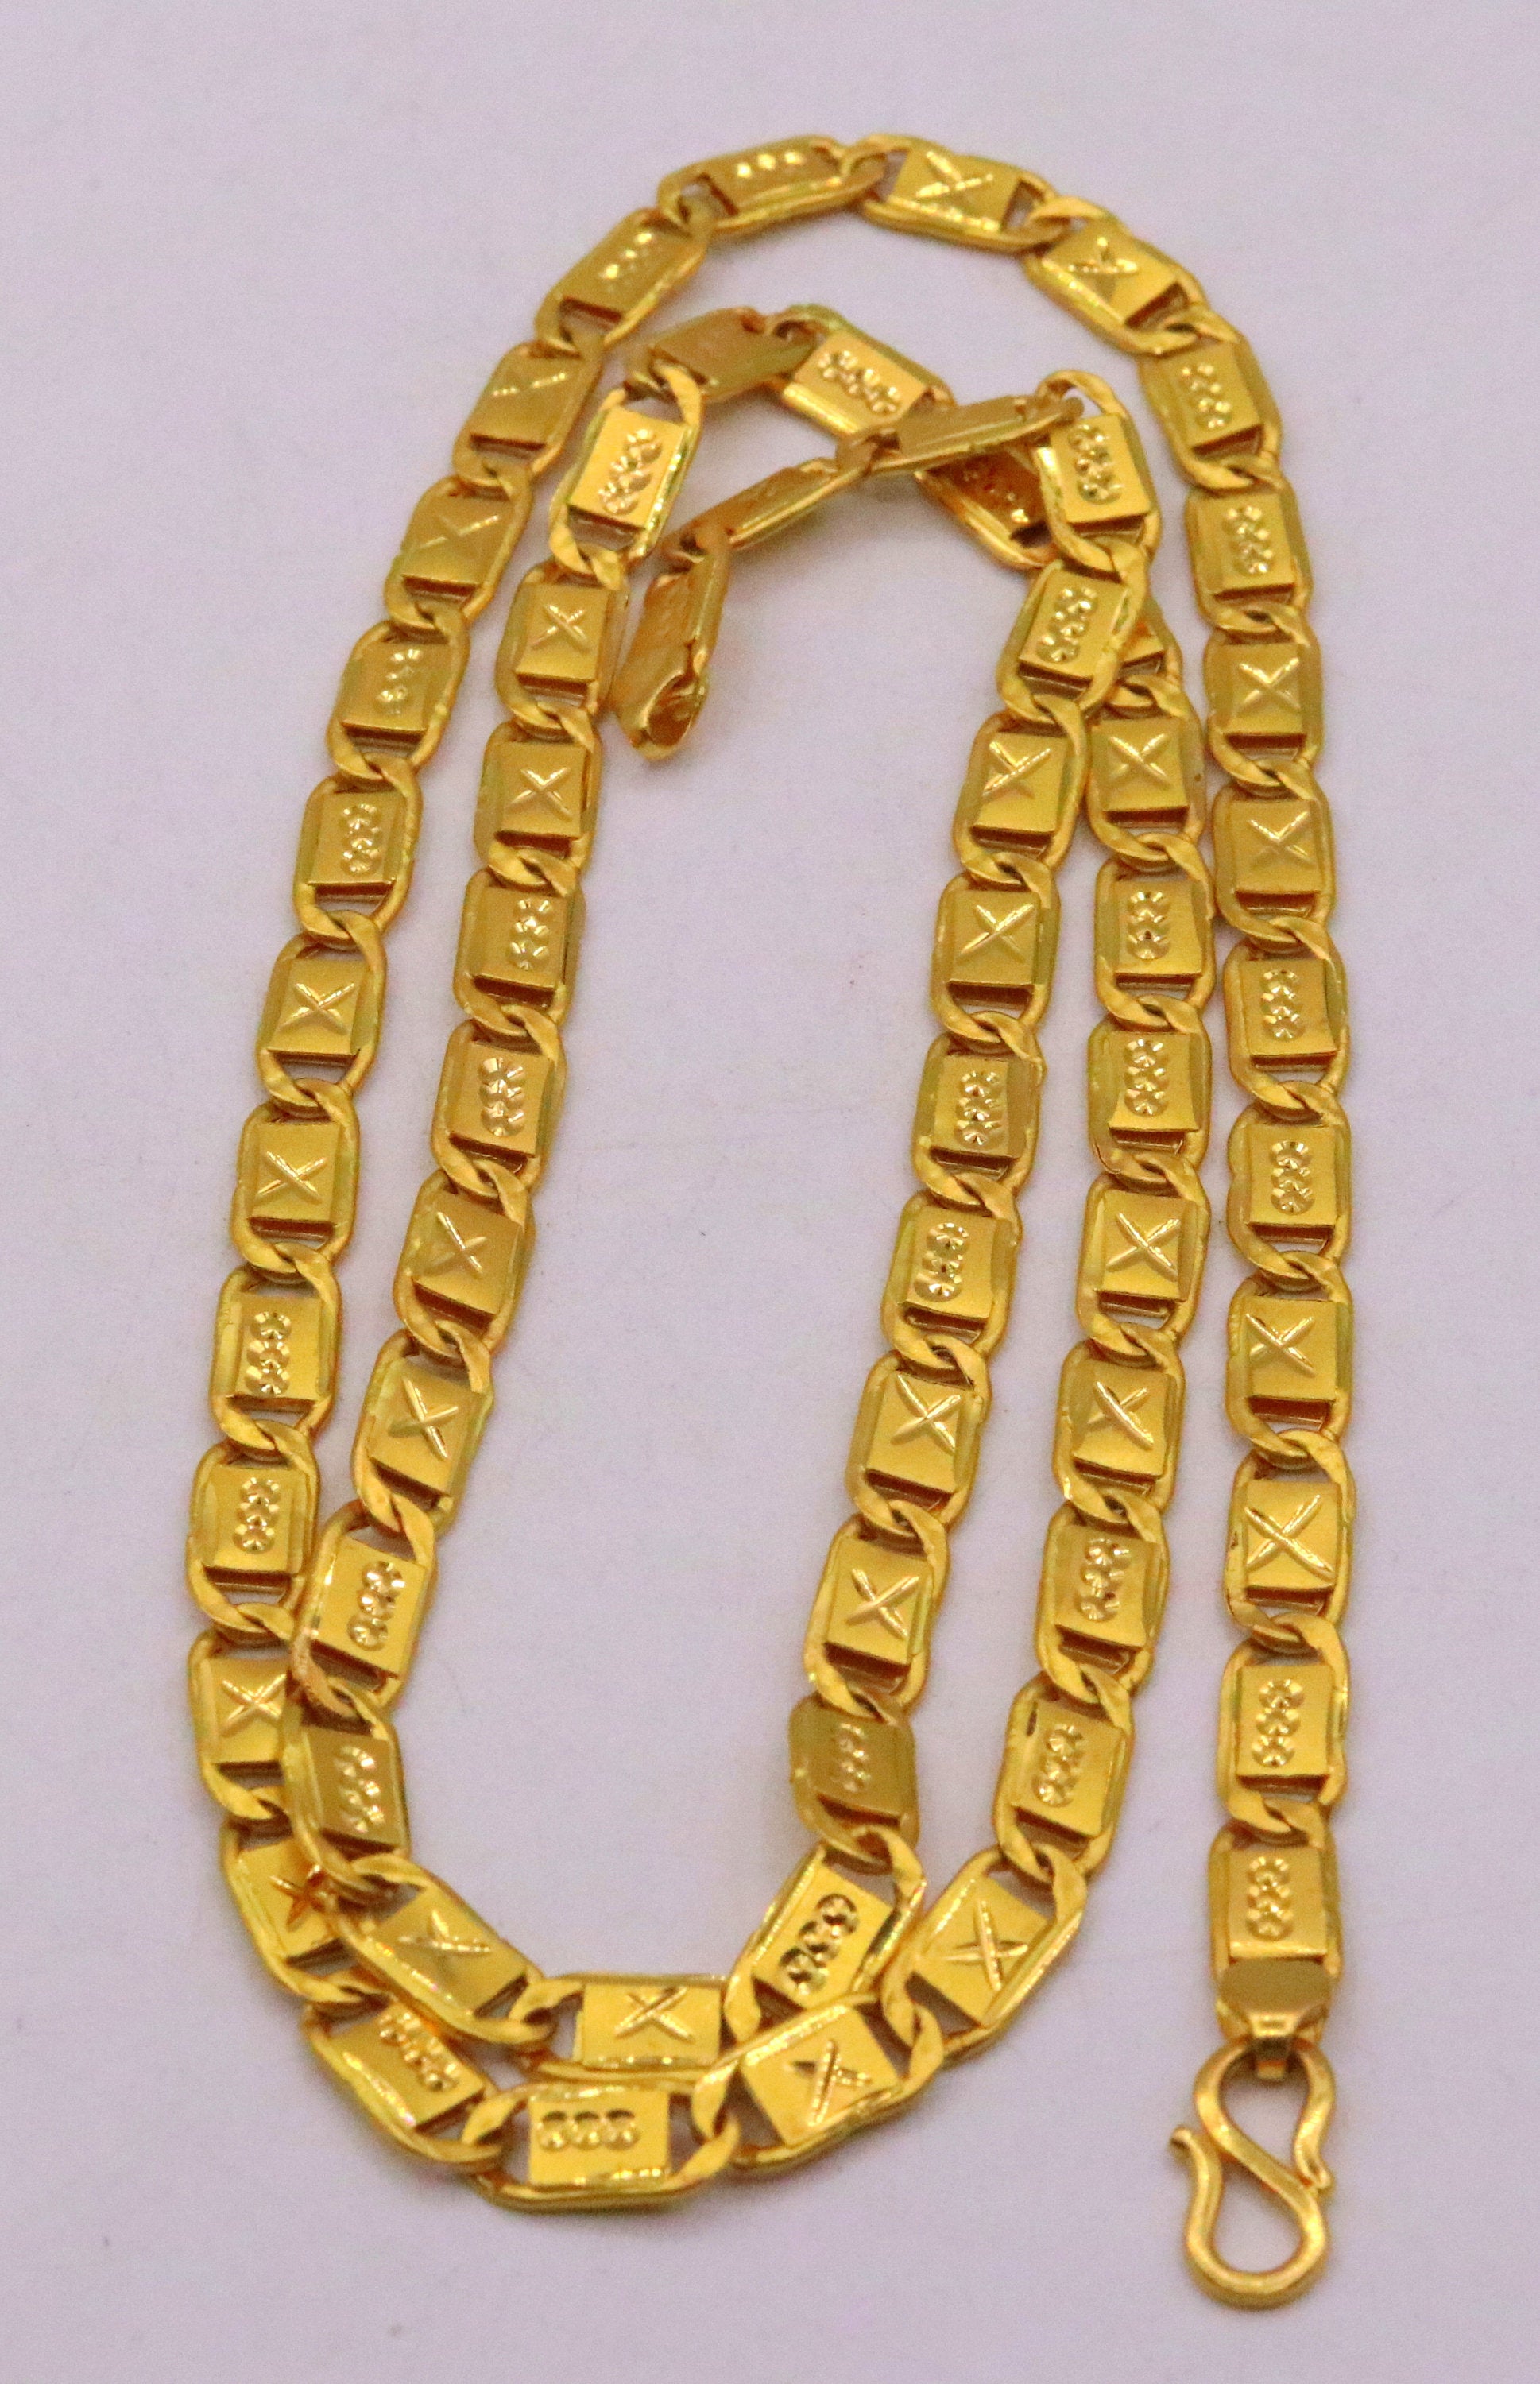 Handmade 22 karat yellow gold 5mm 23 inches solid gold nawabi chain necklace form Rajasthan India ch136 - TRIBAL ORNAMENTS